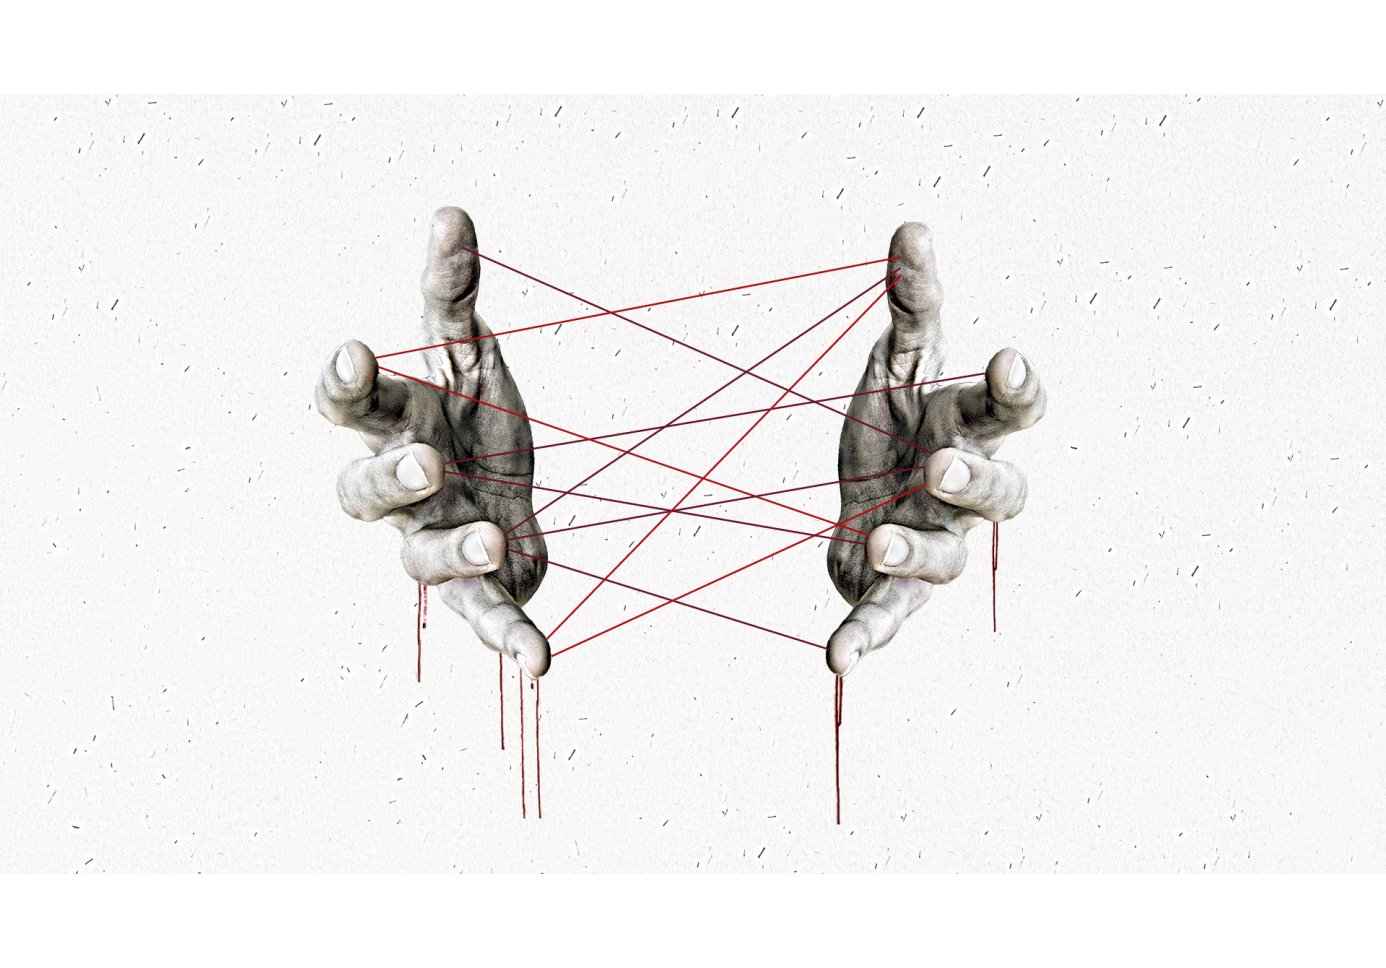 A poster depicting two hands holding a thread